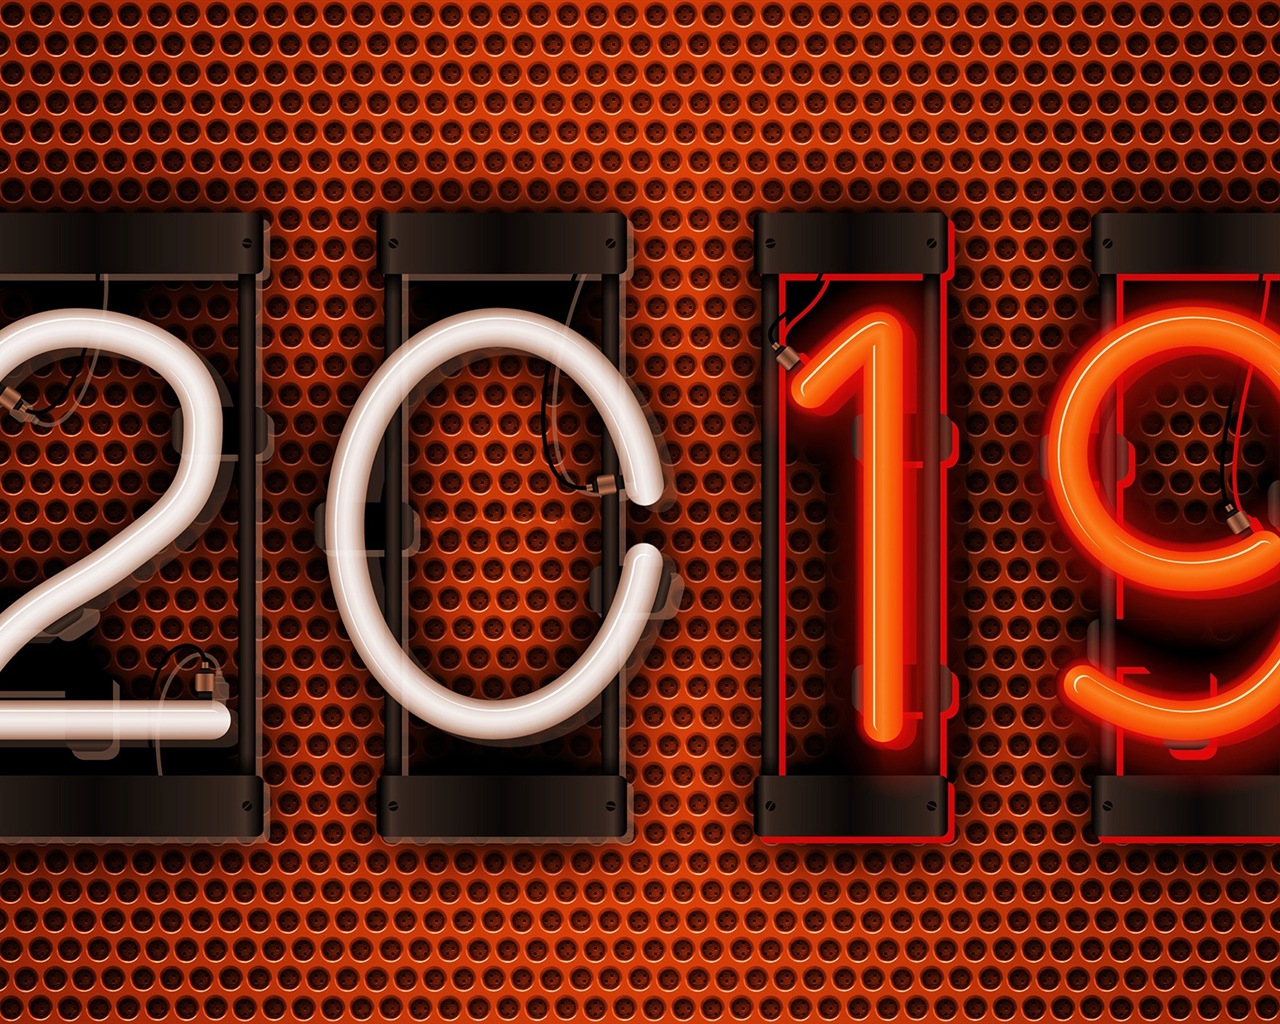 Happy New Year 2019 HD wallpapers #3 - 1280x1024